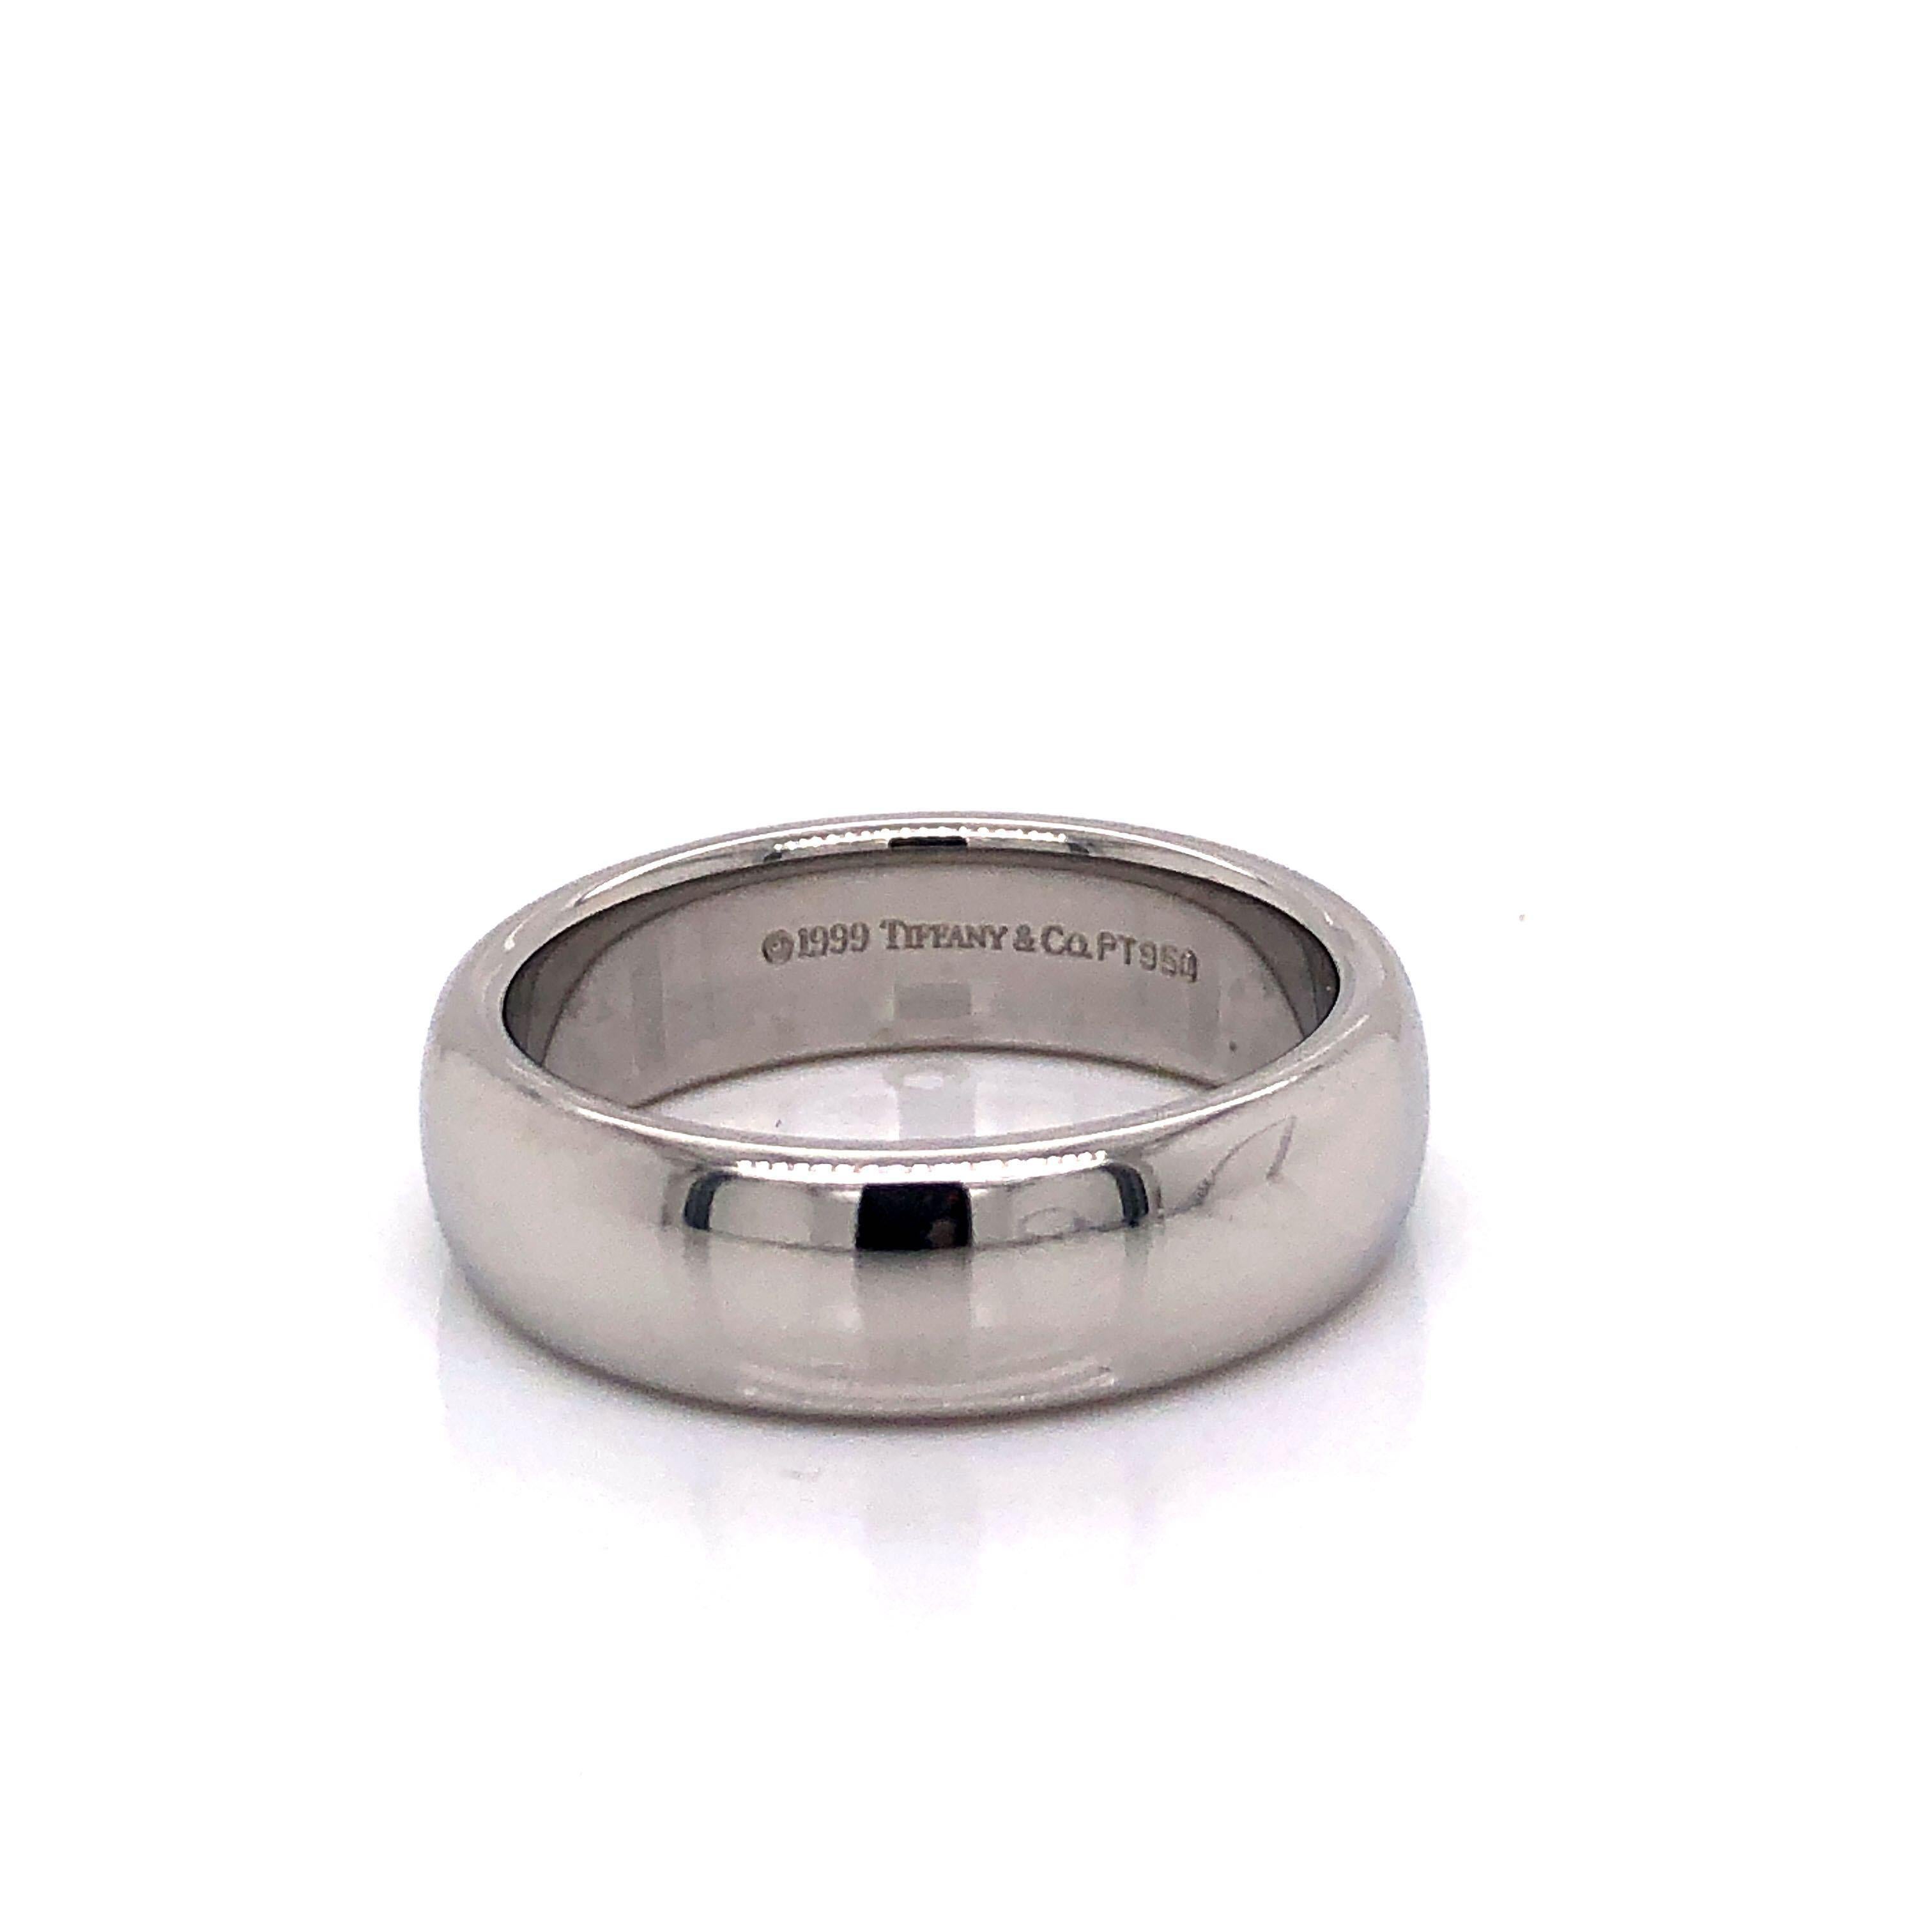 Tiffany & Co. Platinum Polished 6mm Wedding Band Ring Size 8

Condition:  Excellent Condition, Professionally Cleaned and Polished
Metal:  Platinum (Marked, and Professionally Tested)
Weight:  15g
Width:  6mm
Markings:  